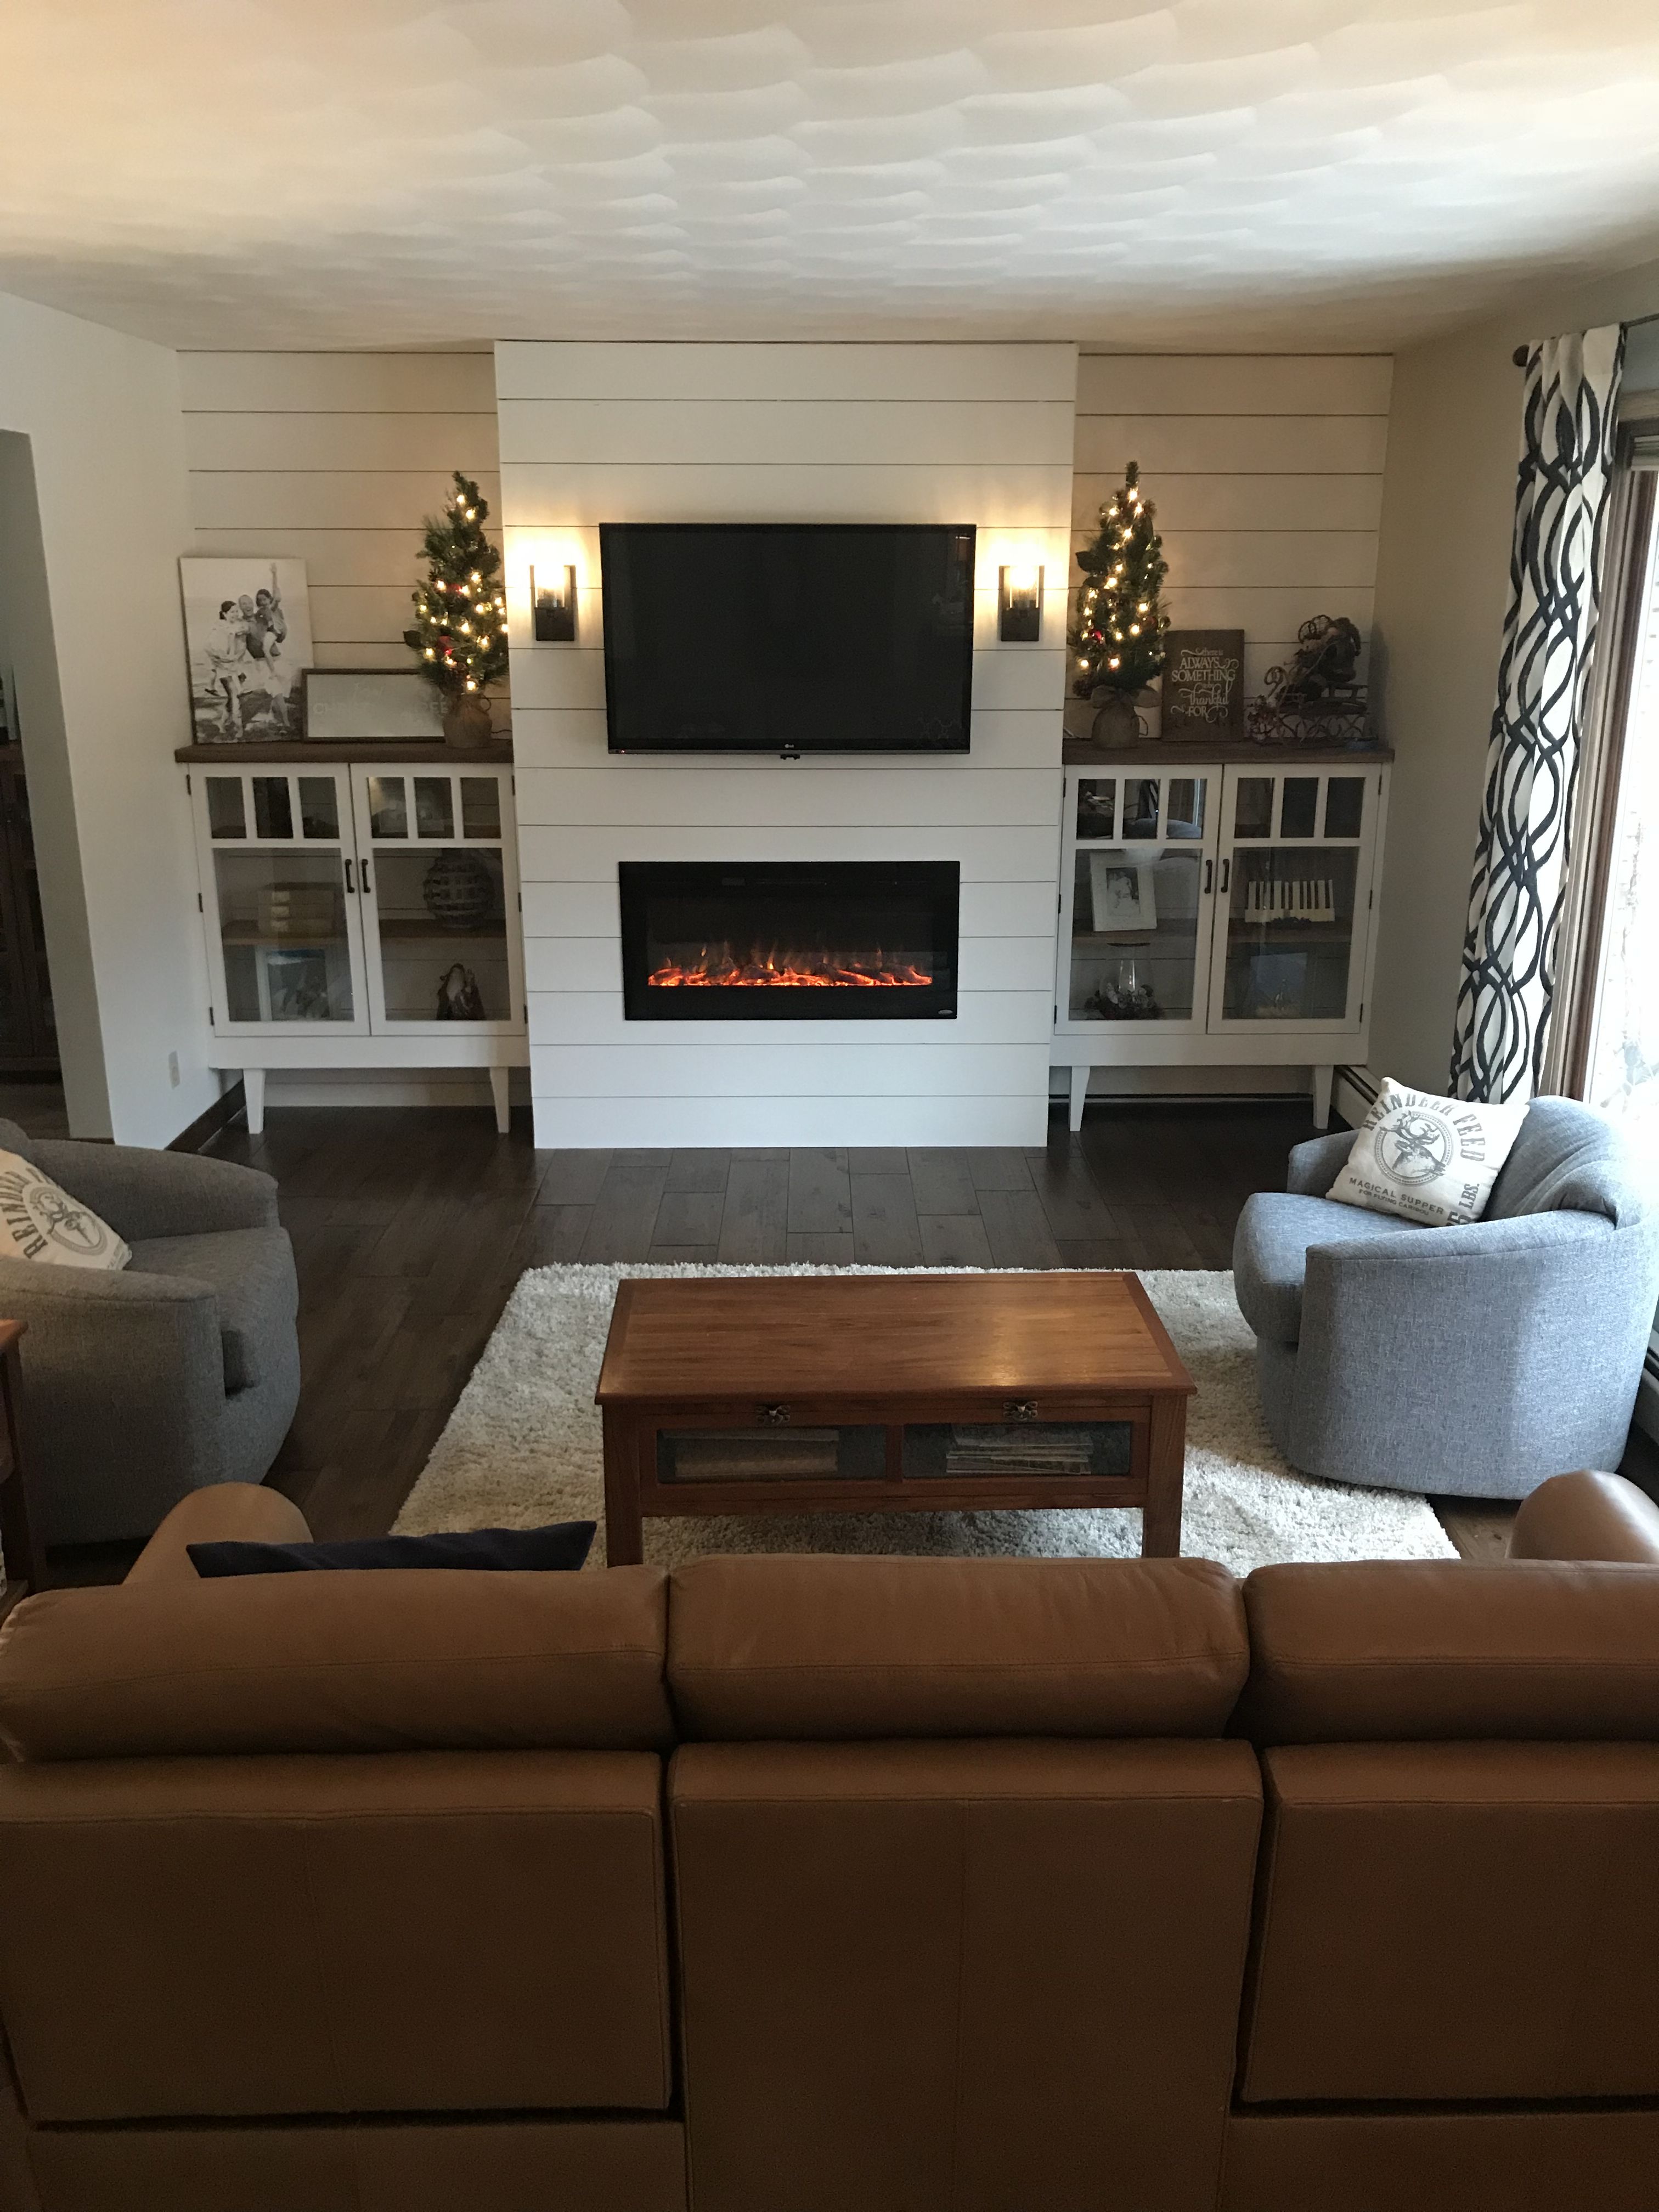 Gas Fireplace Cabinets Fresh Built In Cabinets with Shiplap Fireplace